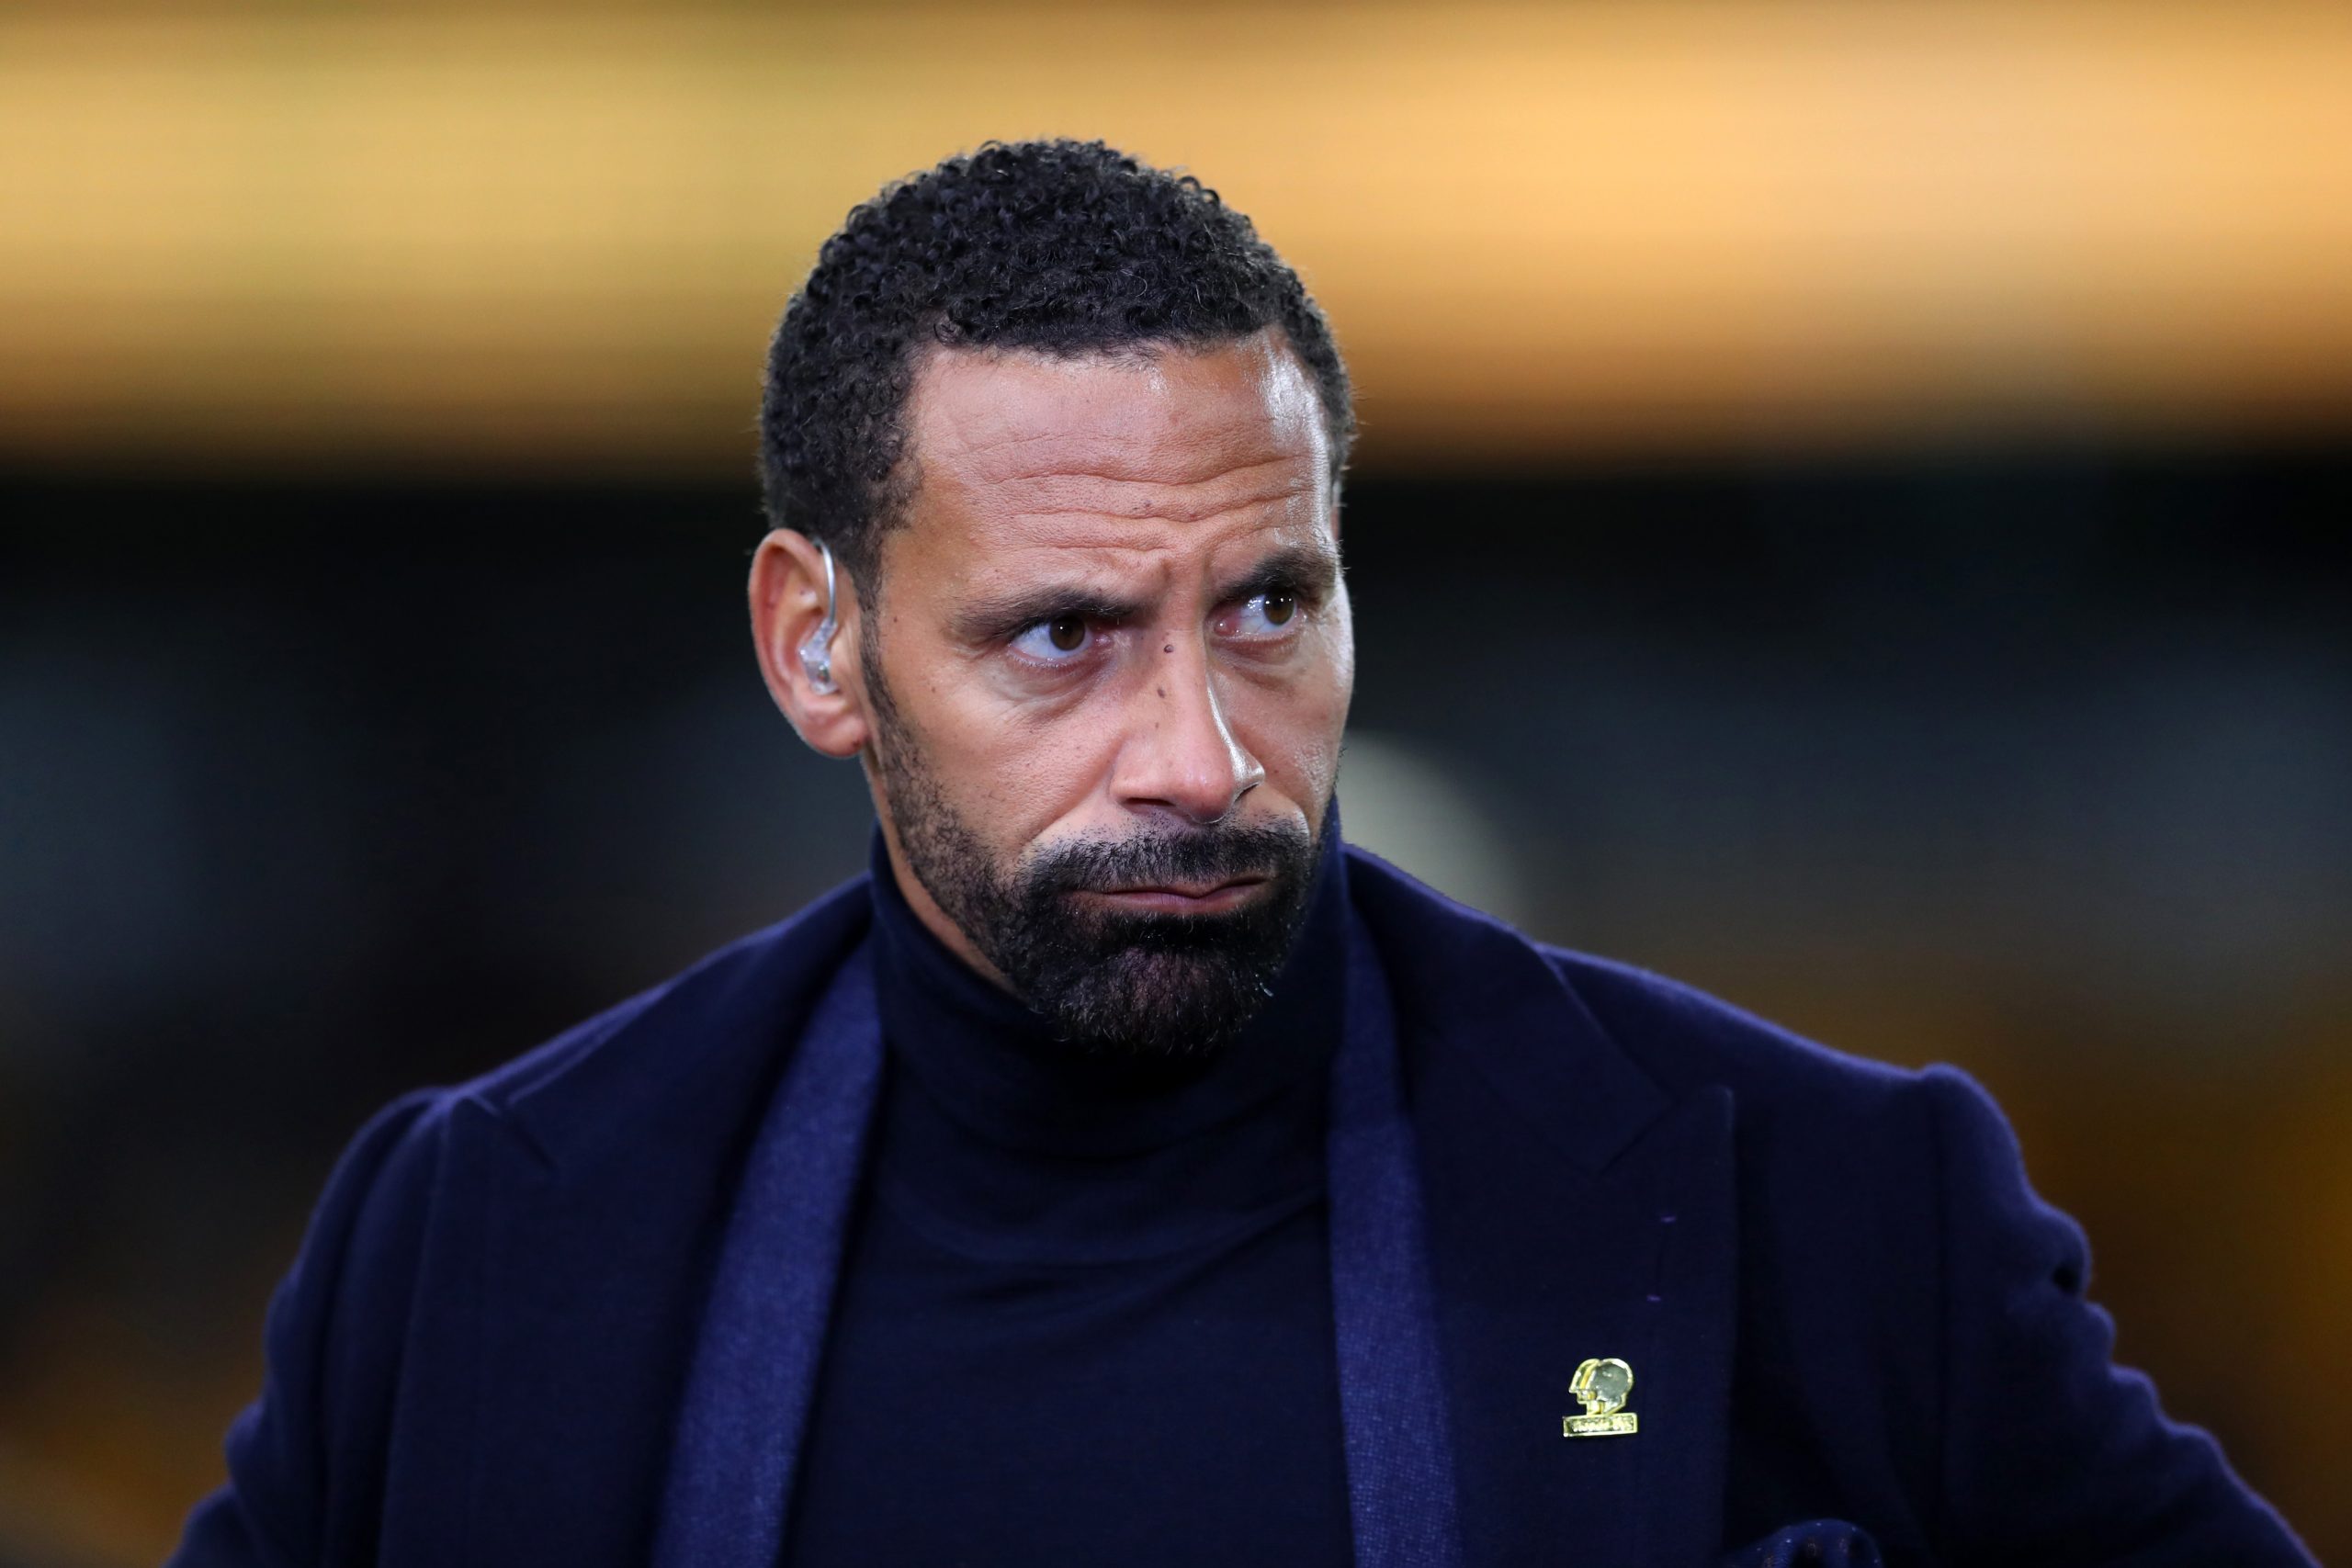 Rio Ferdinand claims Chelsea cannot always get away with using young players following Arsenal defeat.